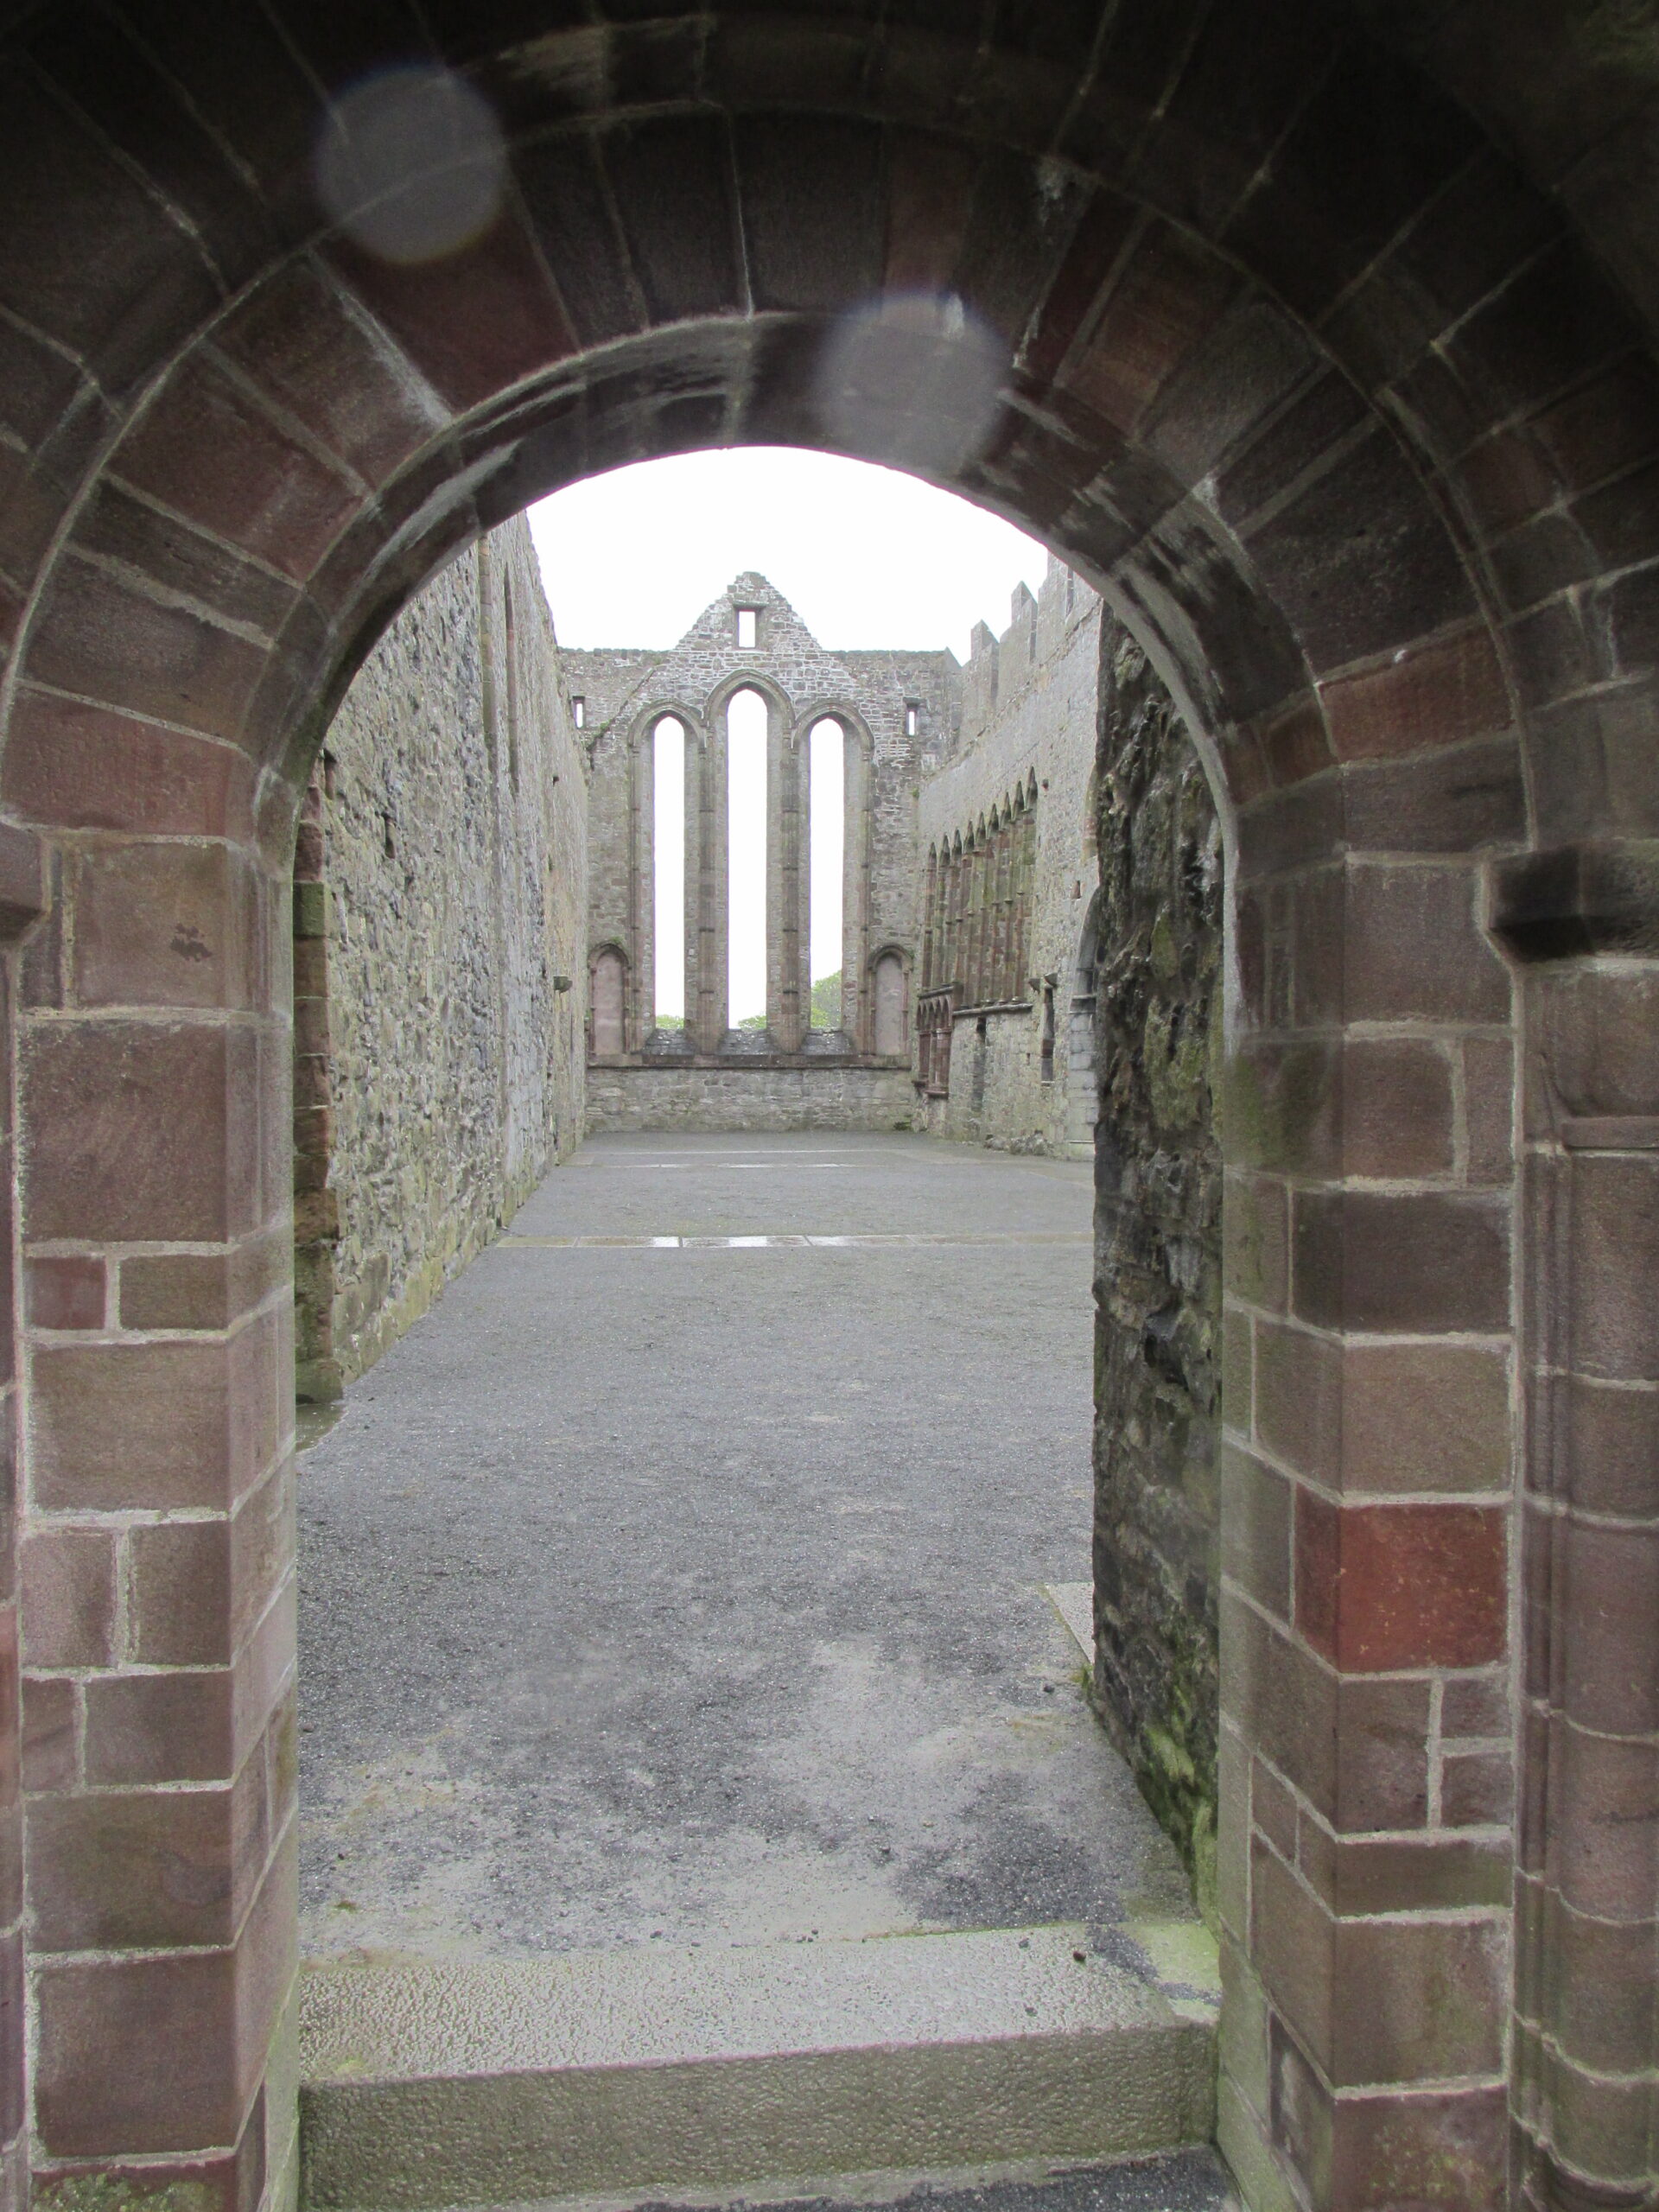 View of the nave of Ardfert Cathedral